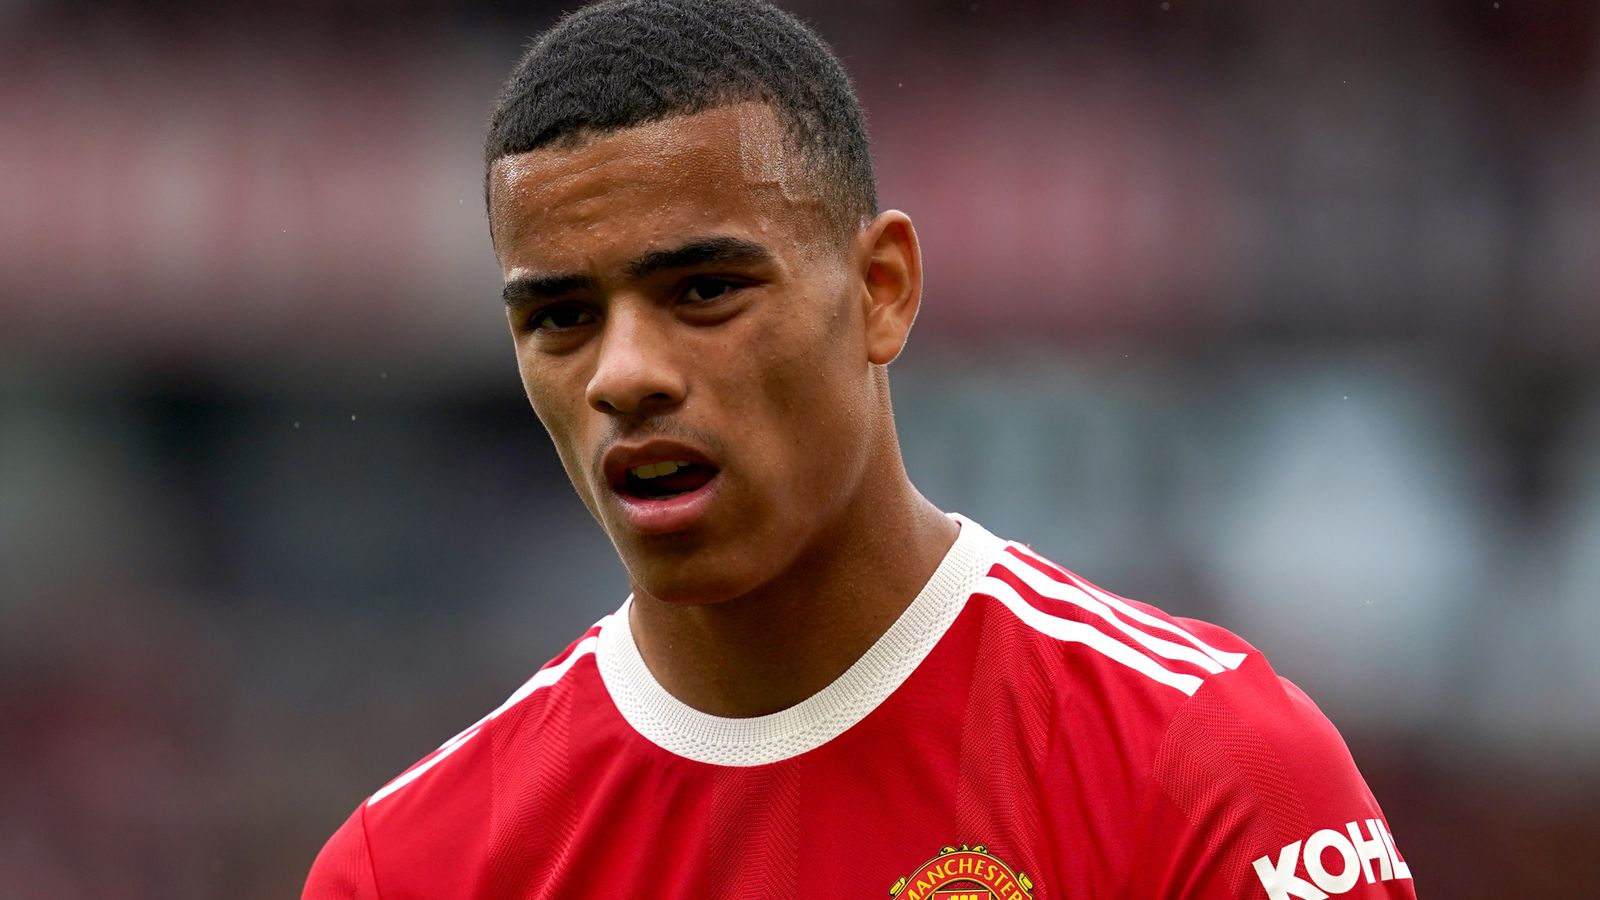 mason-greenwood-manchester-united-footballer-released-on-bail-after-private-hearing